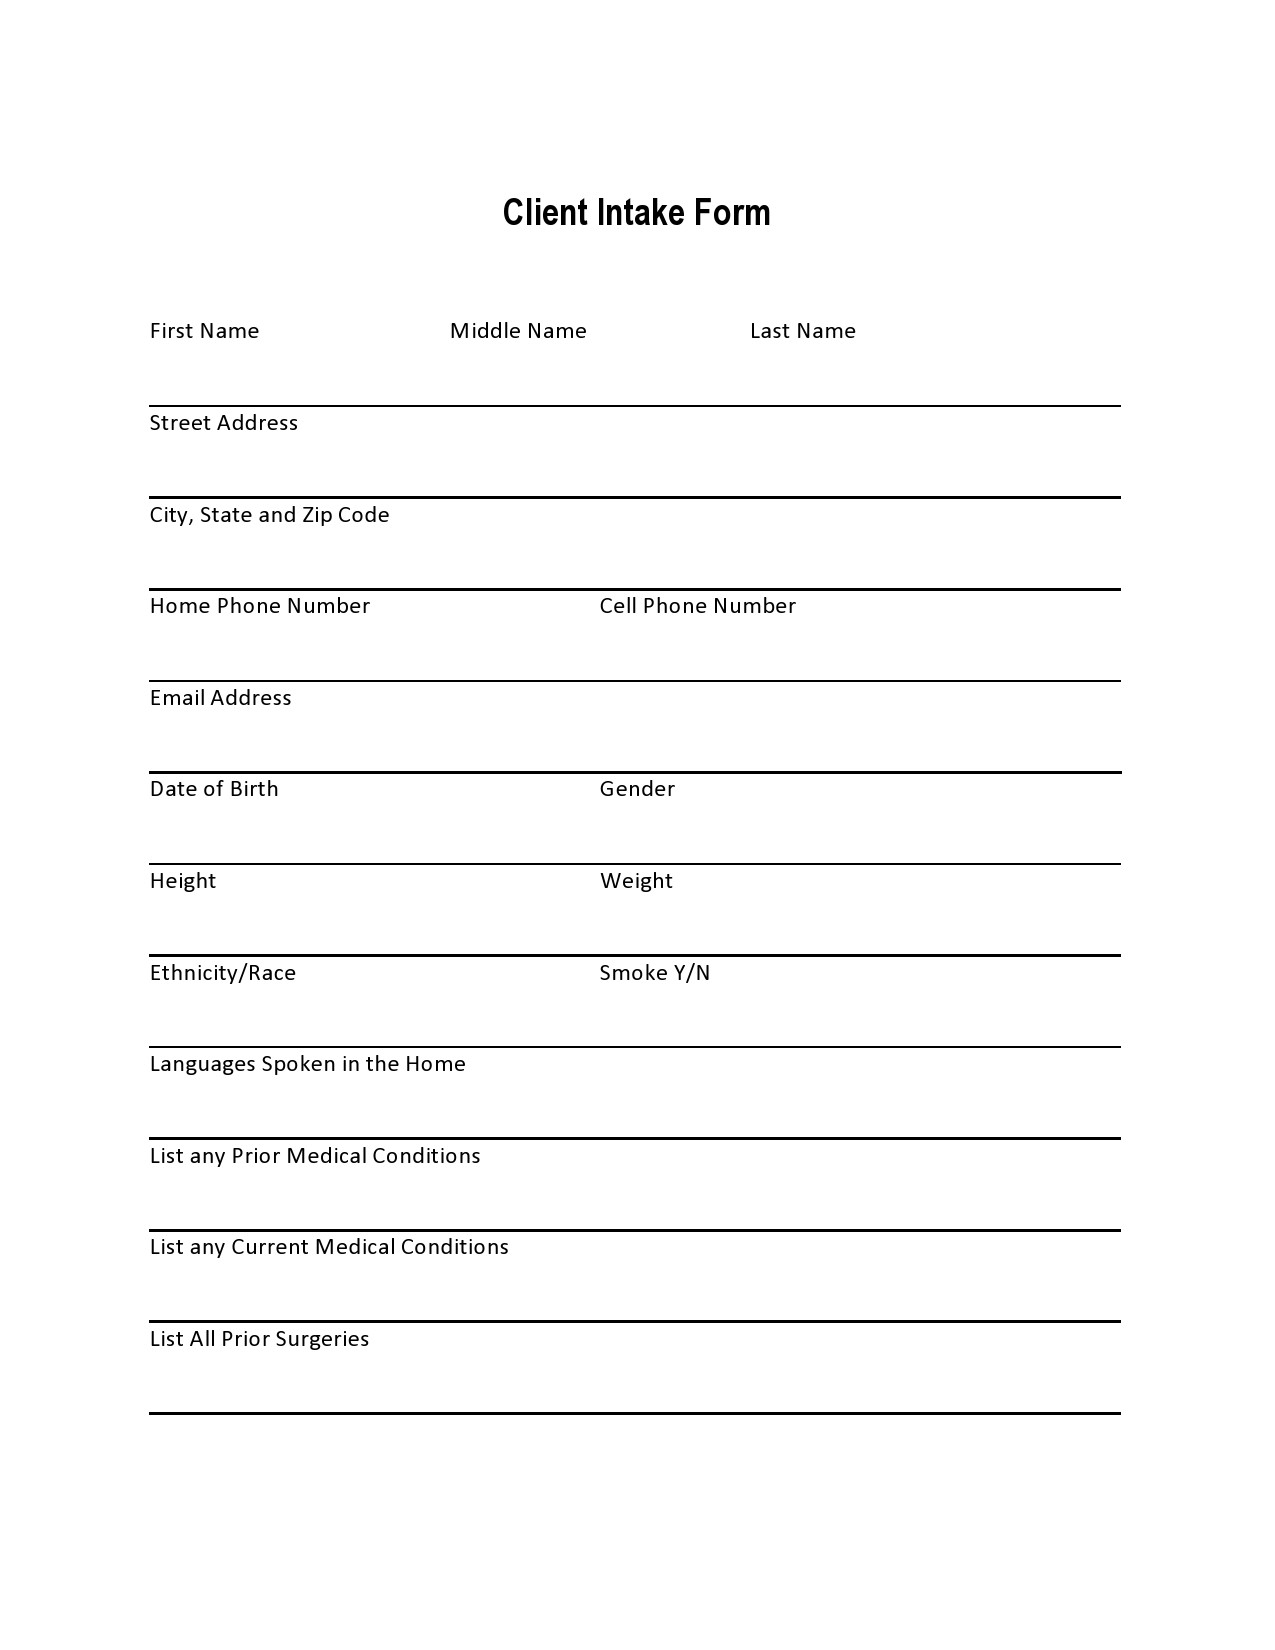 Free client intake form 05